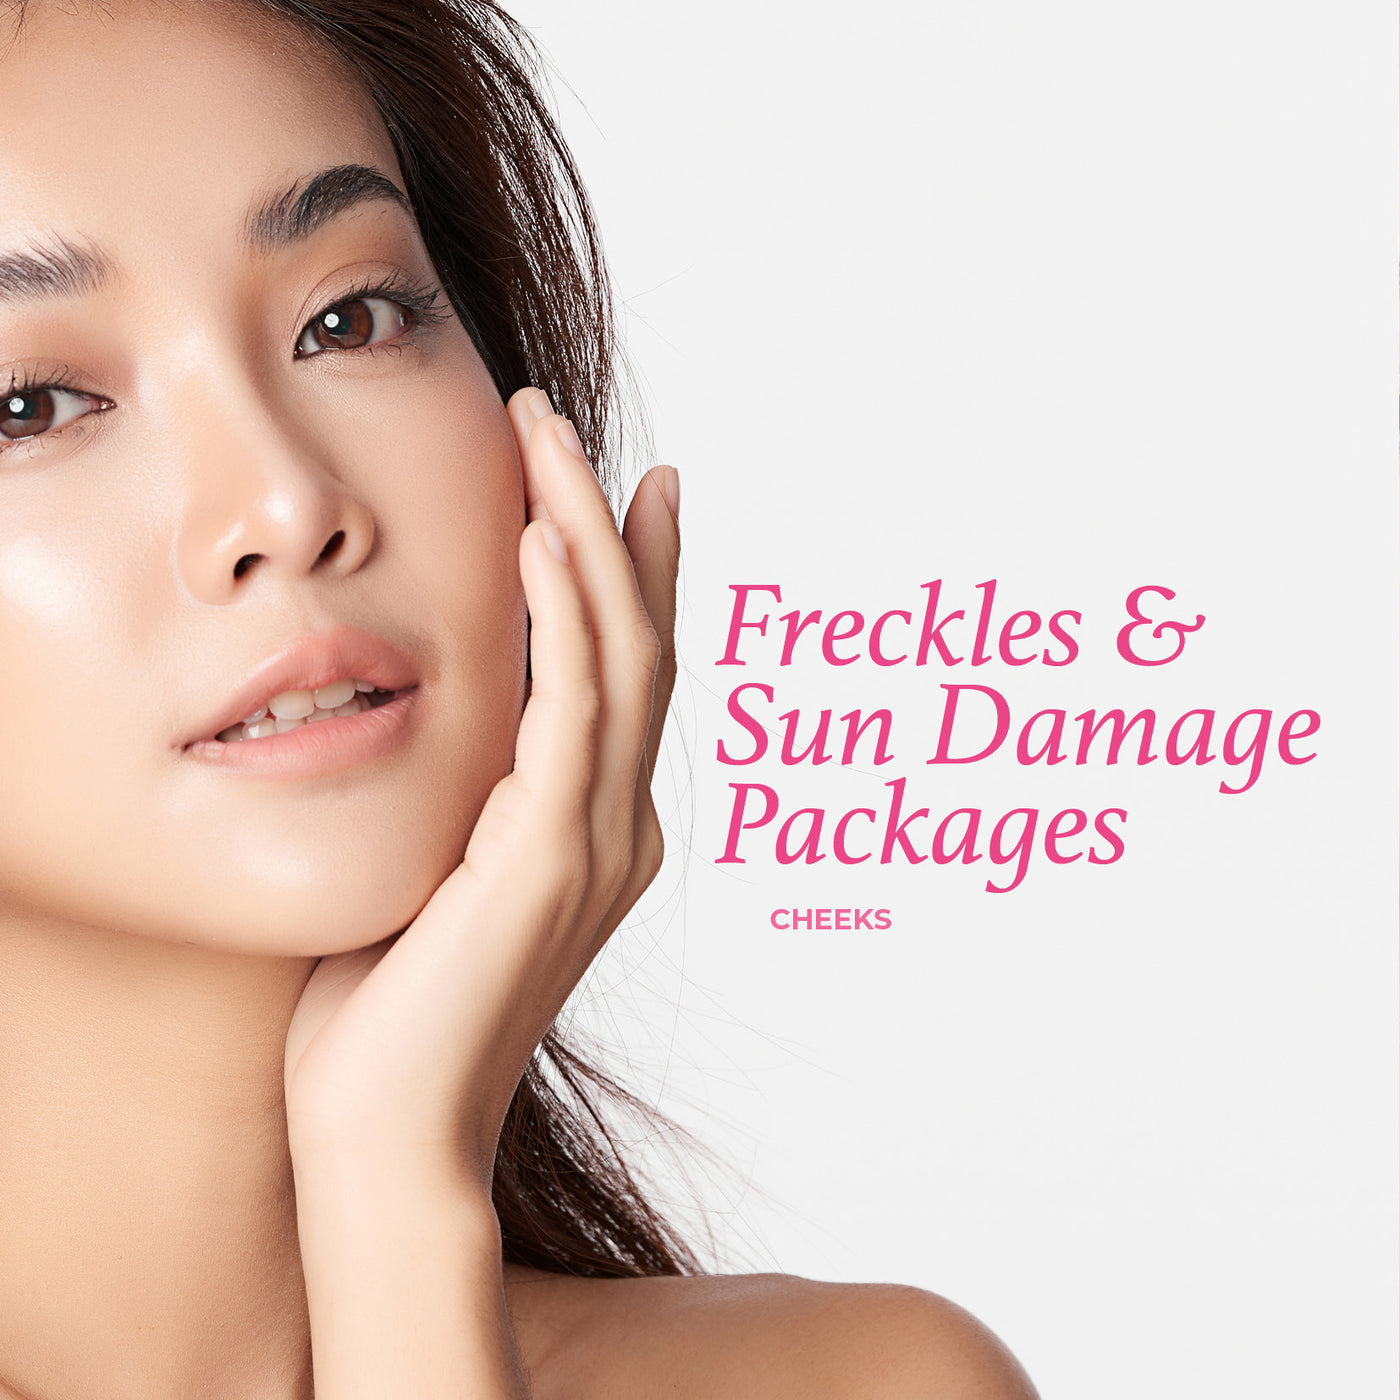 Freckles & Sun Damage Package - Cheeks